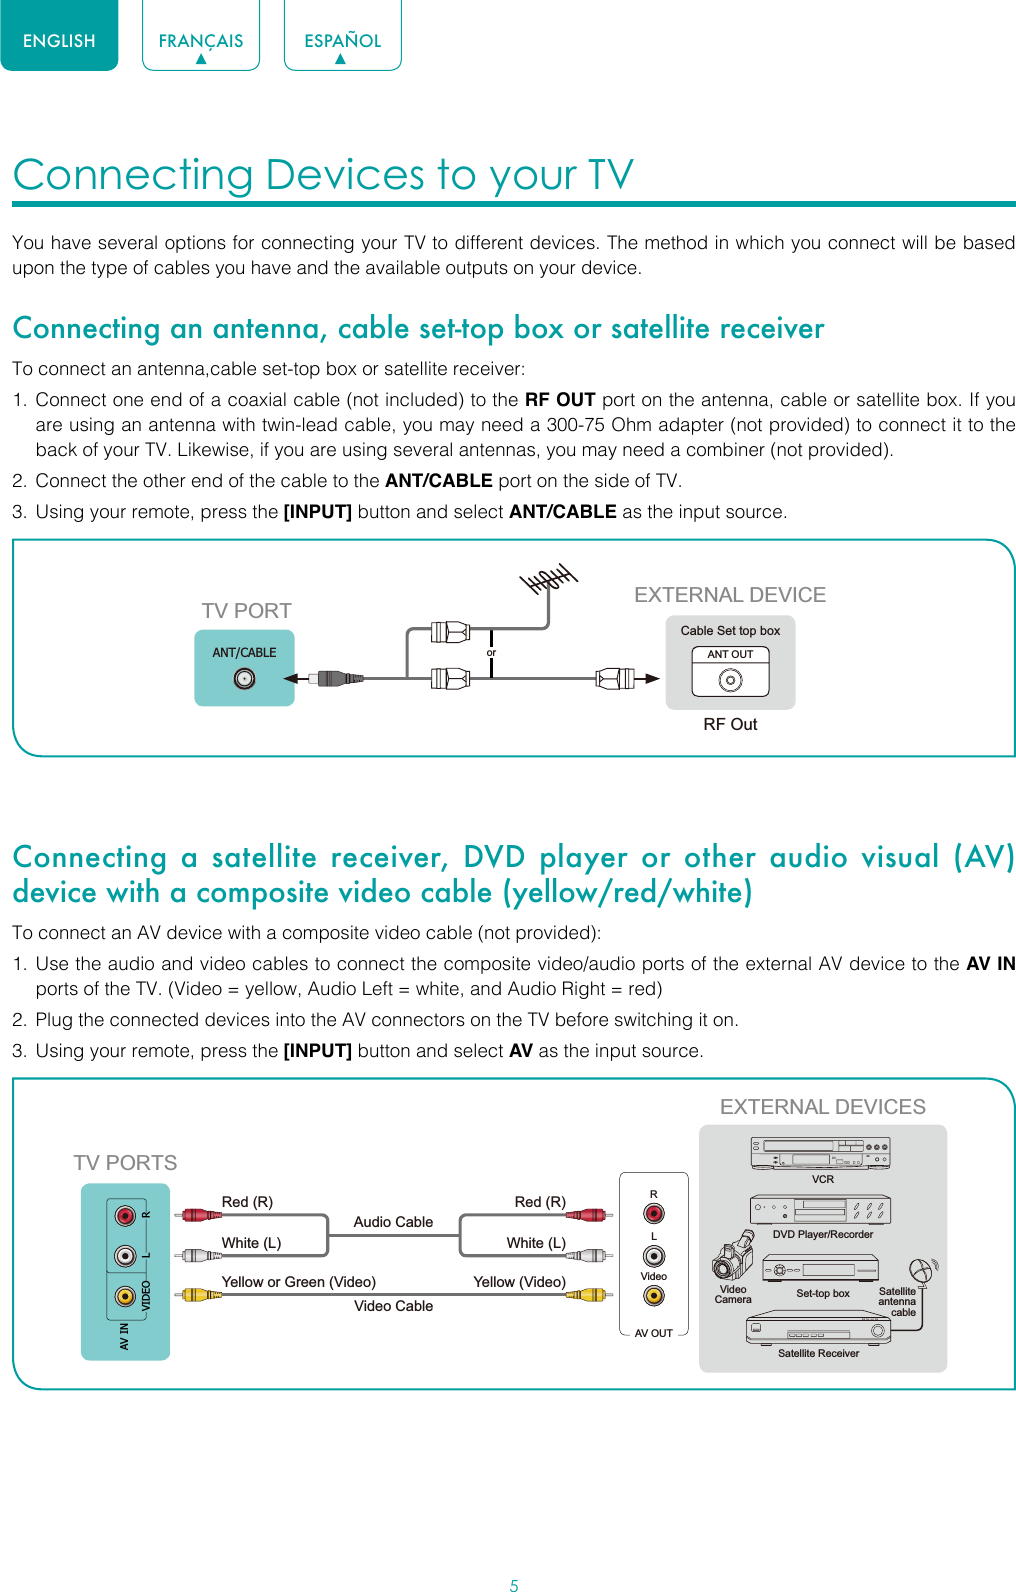 5ENGLISH FRANÇAIS ESPAÑOLConnecting Devices to your TV You have several options for connecting your TV to different devices. The method in which you connect will be based upon the type of cables you have and the available outputs on your device.Connecting an antenna, cable set-top box or satellite receiverTo connect an antenna,cable set-top box or satellite receiver: 1.  Connect one end of a coaxial cable (not included) to the RF OUT port on the antenna, cable or satellite box. If you are using an antenna with twin-lead cable, you may need a 300-75 Ohm adapter (not provided) to connect it to the back of your TV. Likewise, if you are using several antennas, you may need a combiner (not provided).2.  Connect the other end of the cable to the ANT/CABLE port on the side of TV.3.  Using your remote, press the [INPUT] button and select ANT/CABLE as the input source. Connecting a satellite receiver, DVD player or other audio visual (AV) device with a composite video cable (yellow/red/white)To connect an AV device with a composite video cable (not provided):1.  Use the audio and video cables to connect the composite video/audio ports of the external AV device to the AV IN ports of the TV. (Video = yellow, Audio Left = white, and Audio Right = red)2.  Plug the connected devices into the AV connectors on the TV before switching it on.3.  Using your remote, press the [INPUT] button and select AV as the input source.or ANT OUTCable Set top boxRF OutEXTERNAL DEVICETV PORTANT/CABLEAV OUTVideoLRWhite (L)White (L)Yellow (Video)Yellow or Green (Video)Video CableRed (R)Red (R)Audio Cable TV PORTSEXTERNAL DEVICESDVD Player/RecorderVideo Camera Set-top boxSatellite ReceiverSatellite antenna cableVCRVIDEOL RAV IN